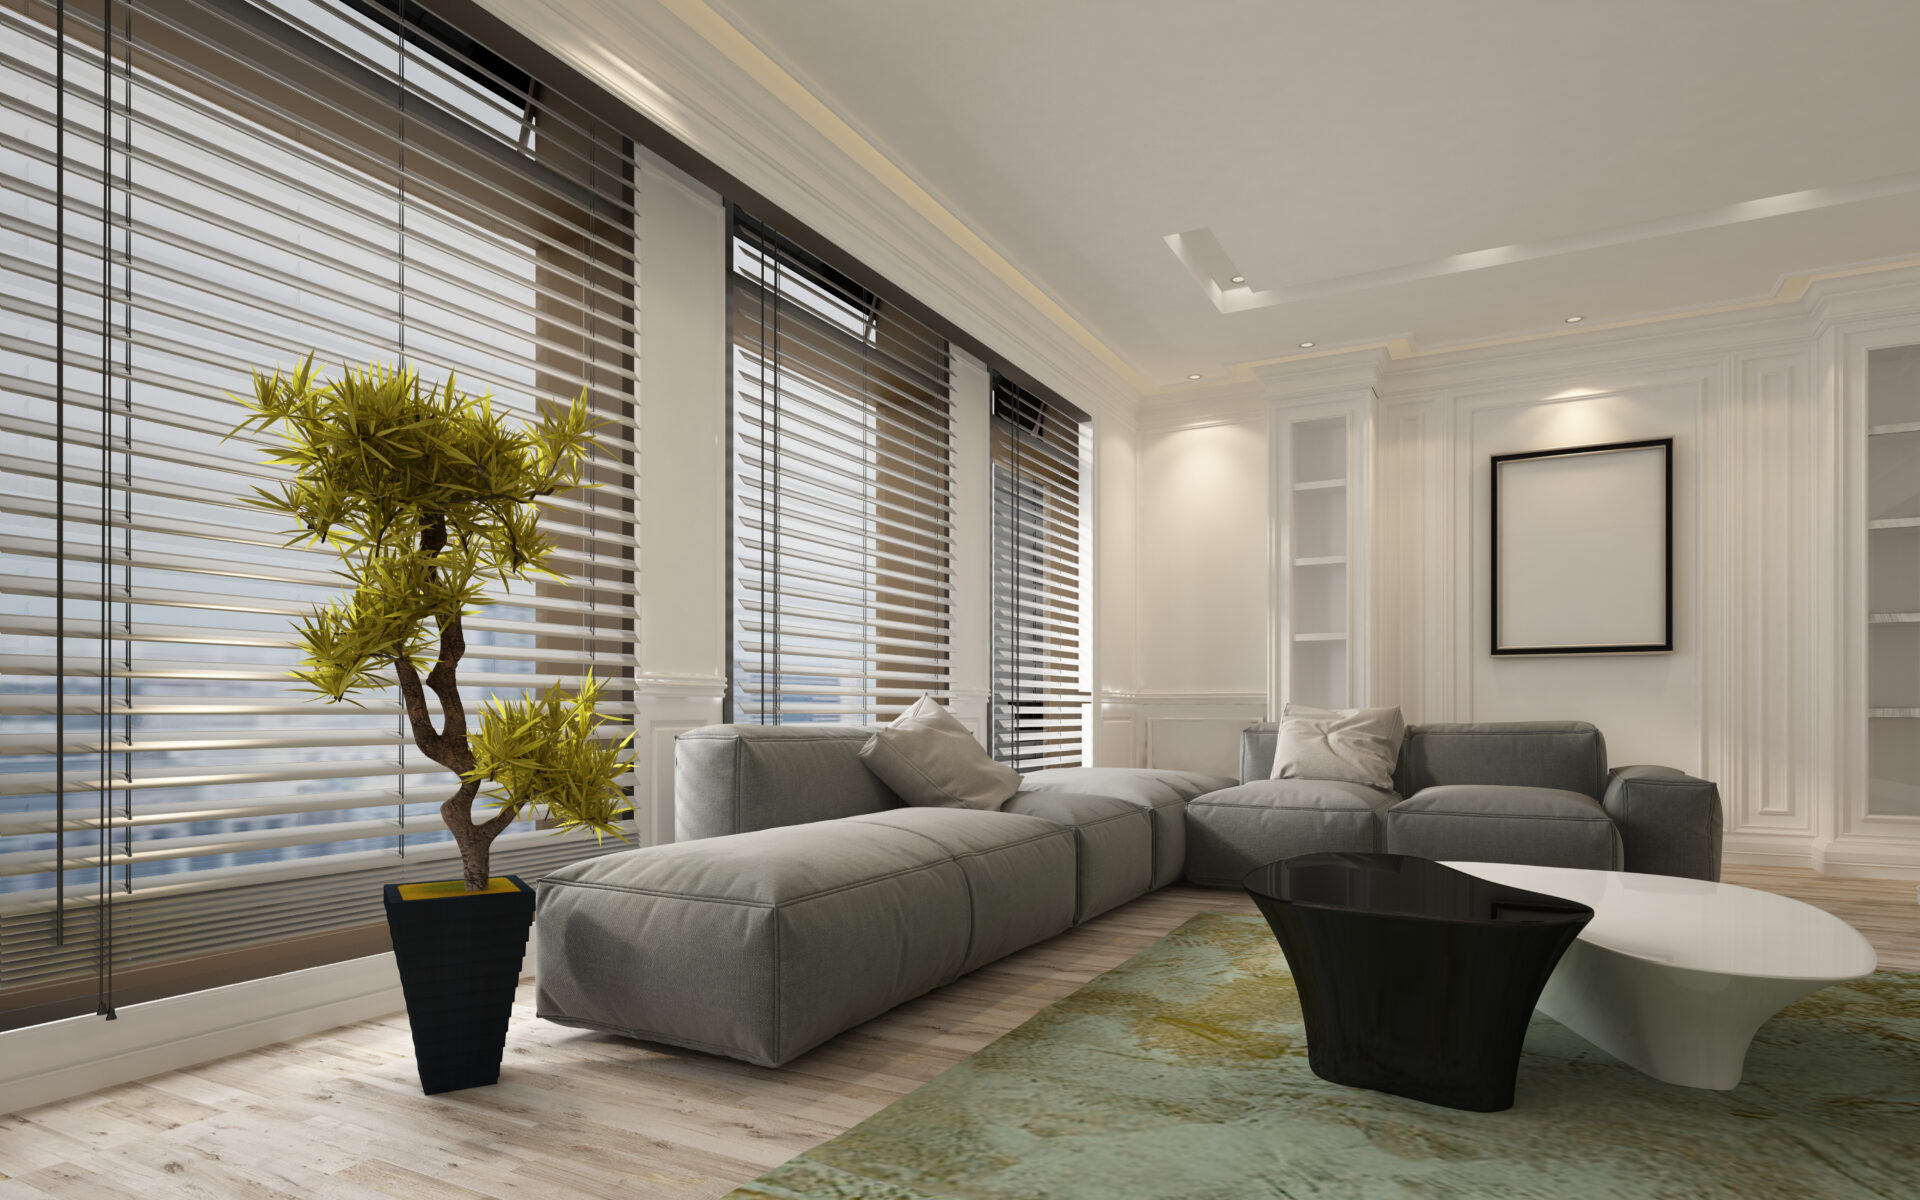 Window blinds in a modern apartment living room. Wholesale Blind Factory